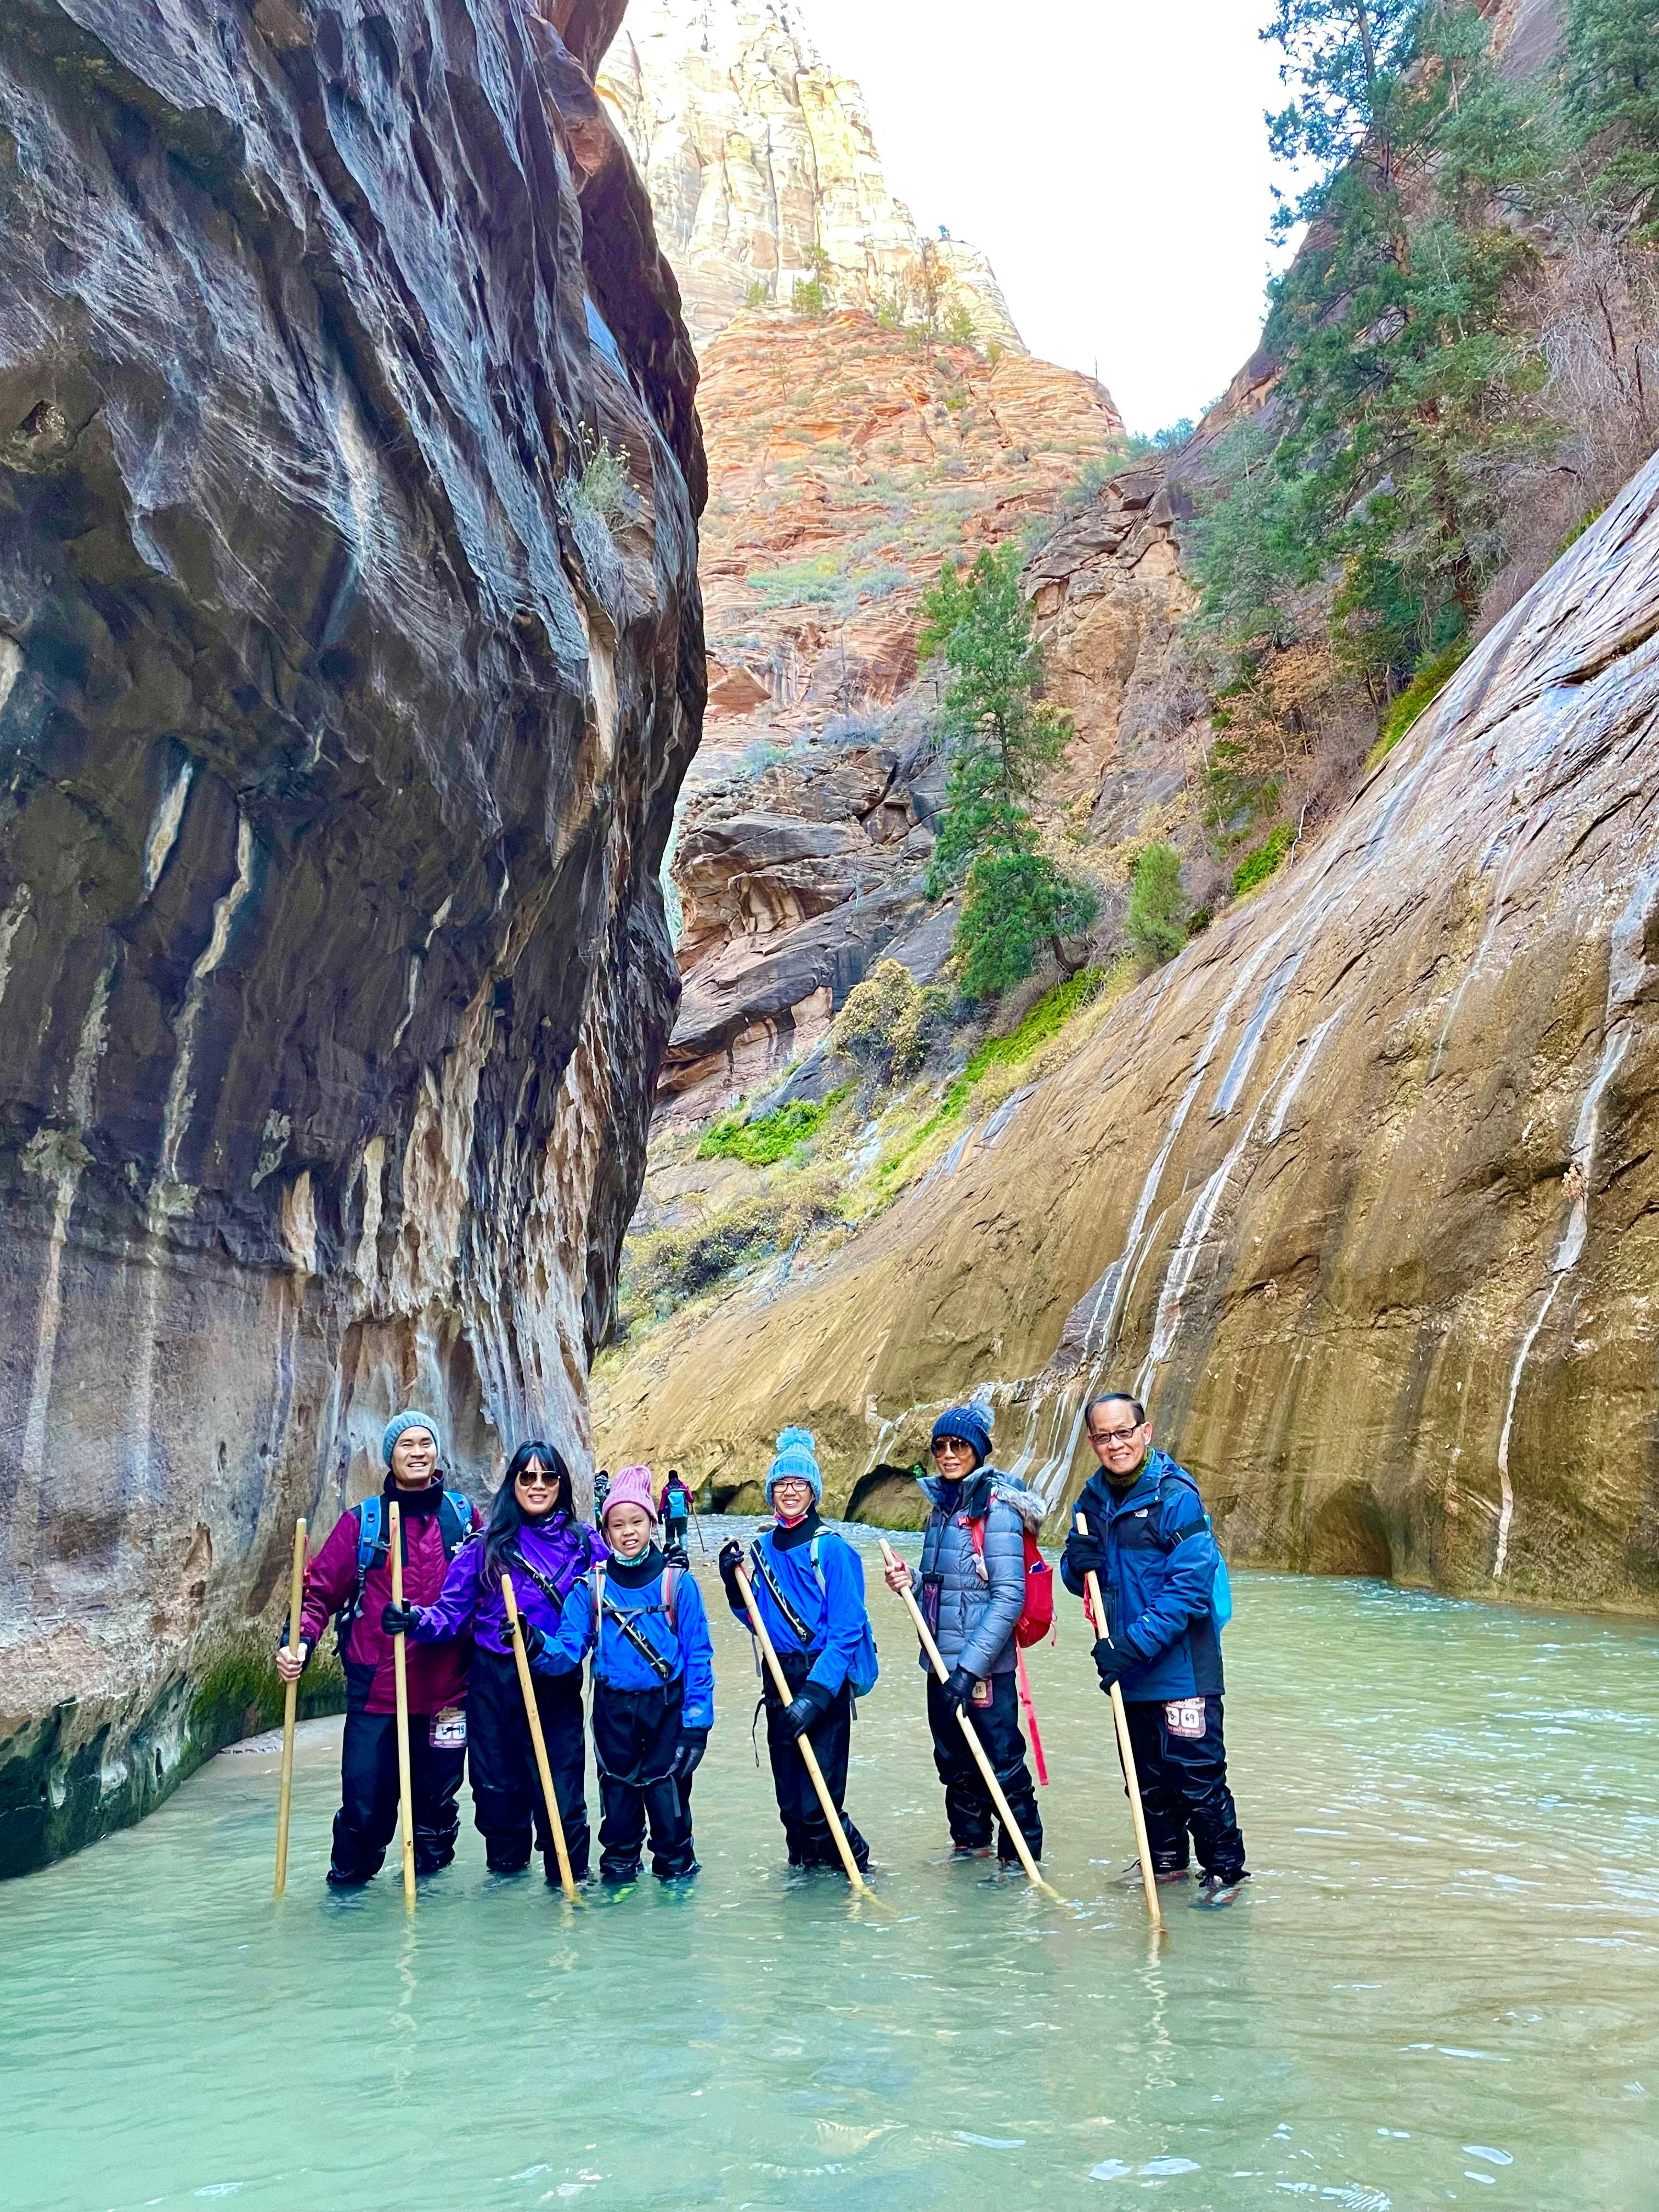 BRENDA & TIGER's group RV trip gathered for a photo on a hike through the Narrows in Zion national park